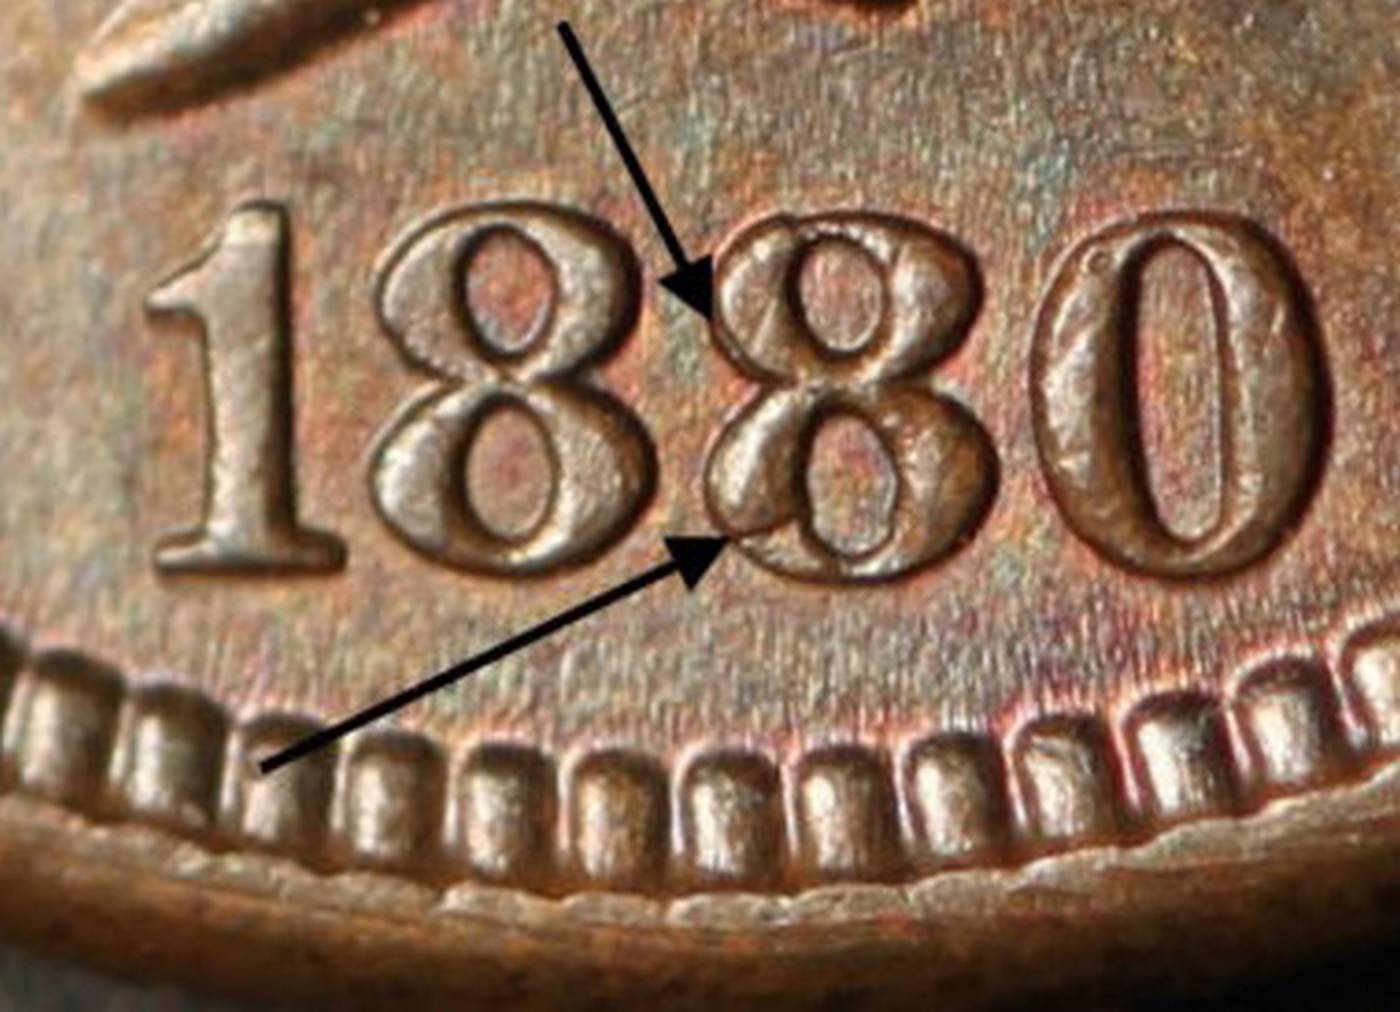 1880 PUN-003 - Indian Head Penny - Photo by Ed Nathanson